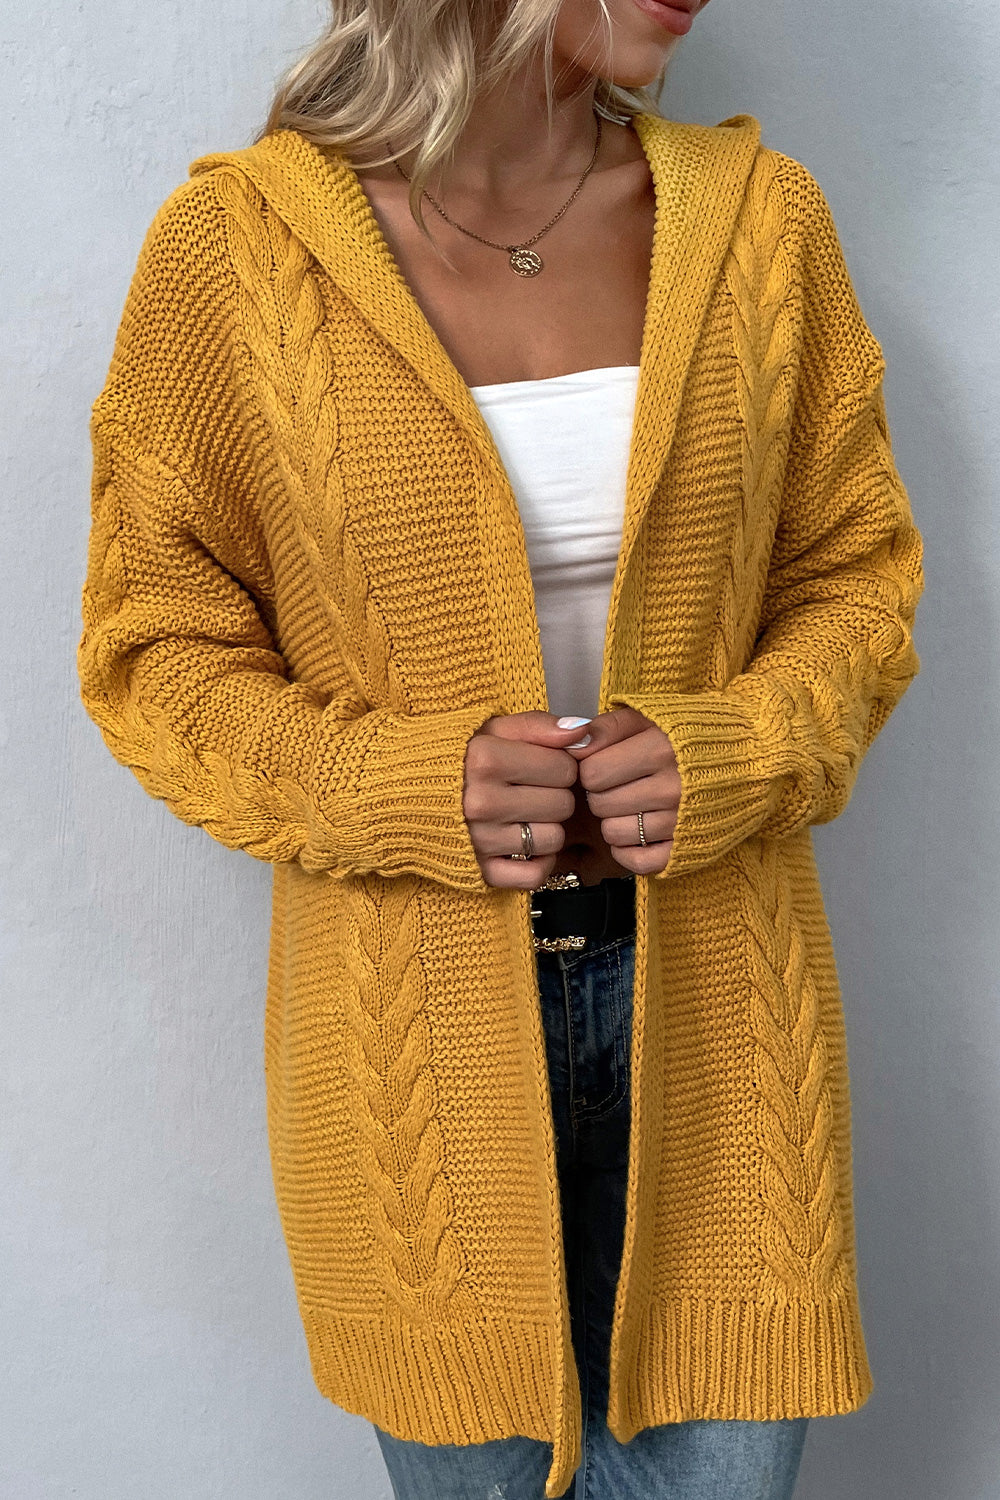 Trendsi Cupid Beauty Supplies Honey / S Woman Cardigan Cable-Knit Dropped Shoulder Hooded Cardigan